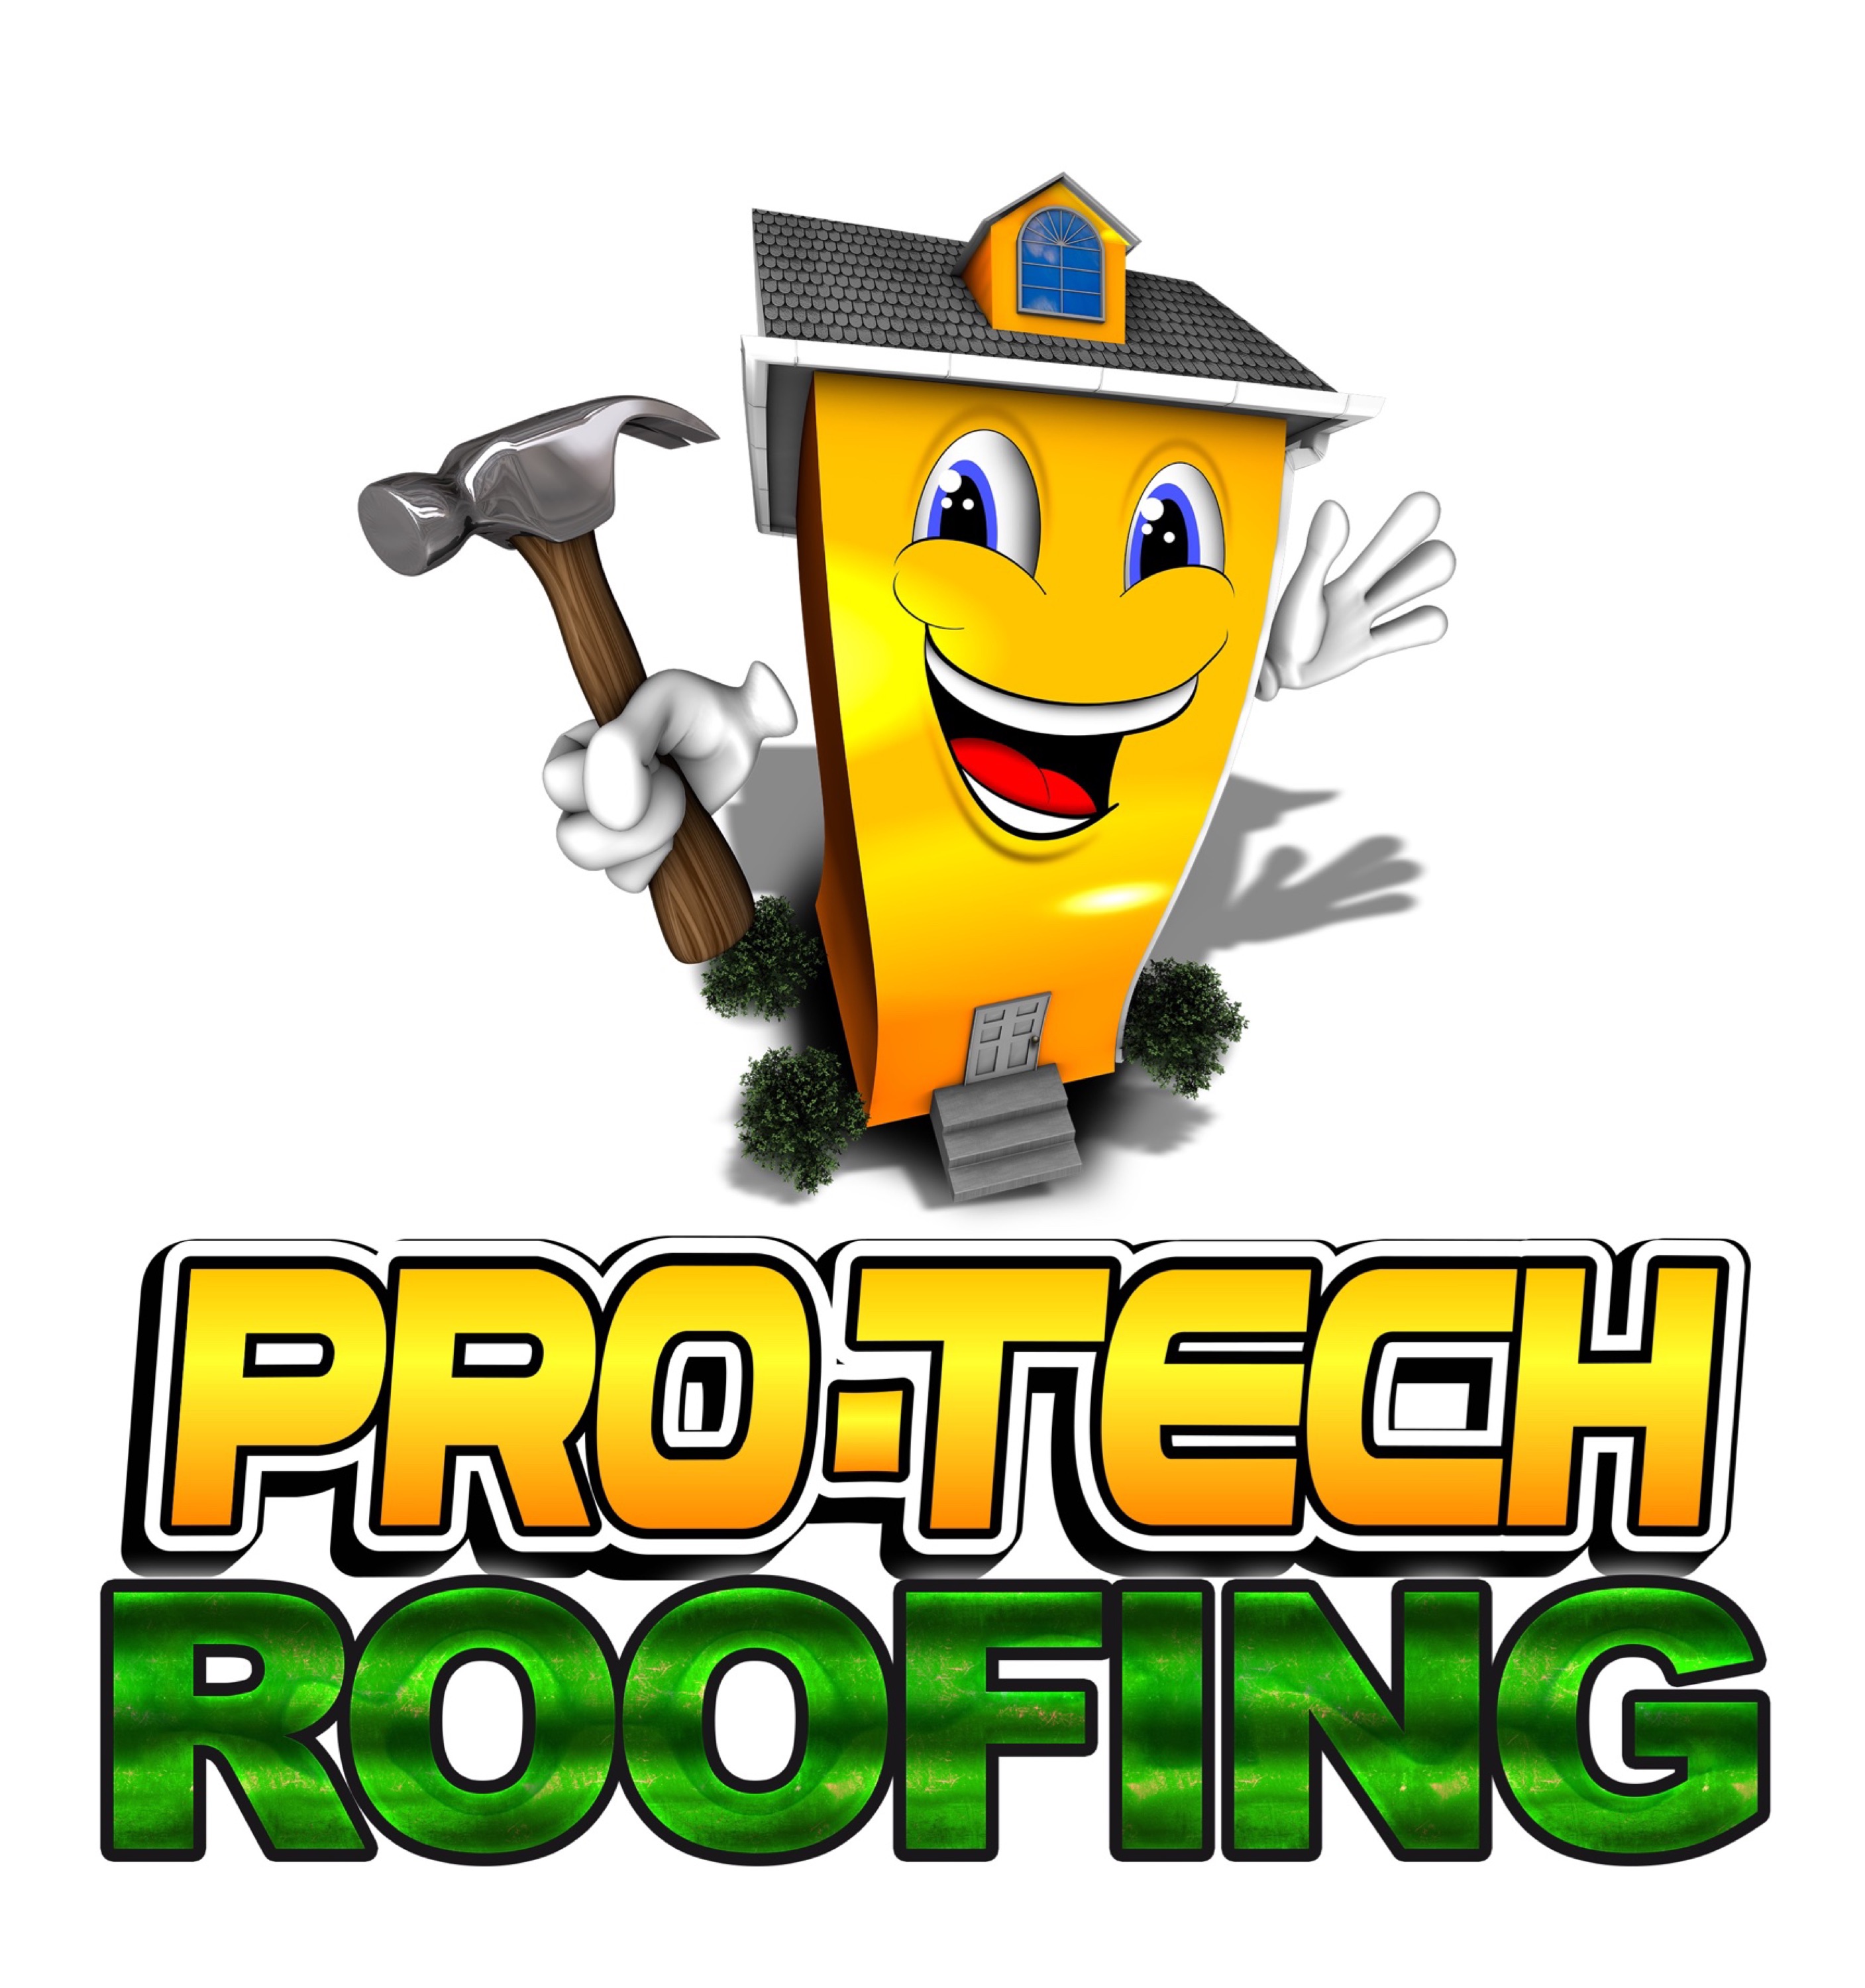 Pro-Tech Roofing Contractor, Inc. Logo